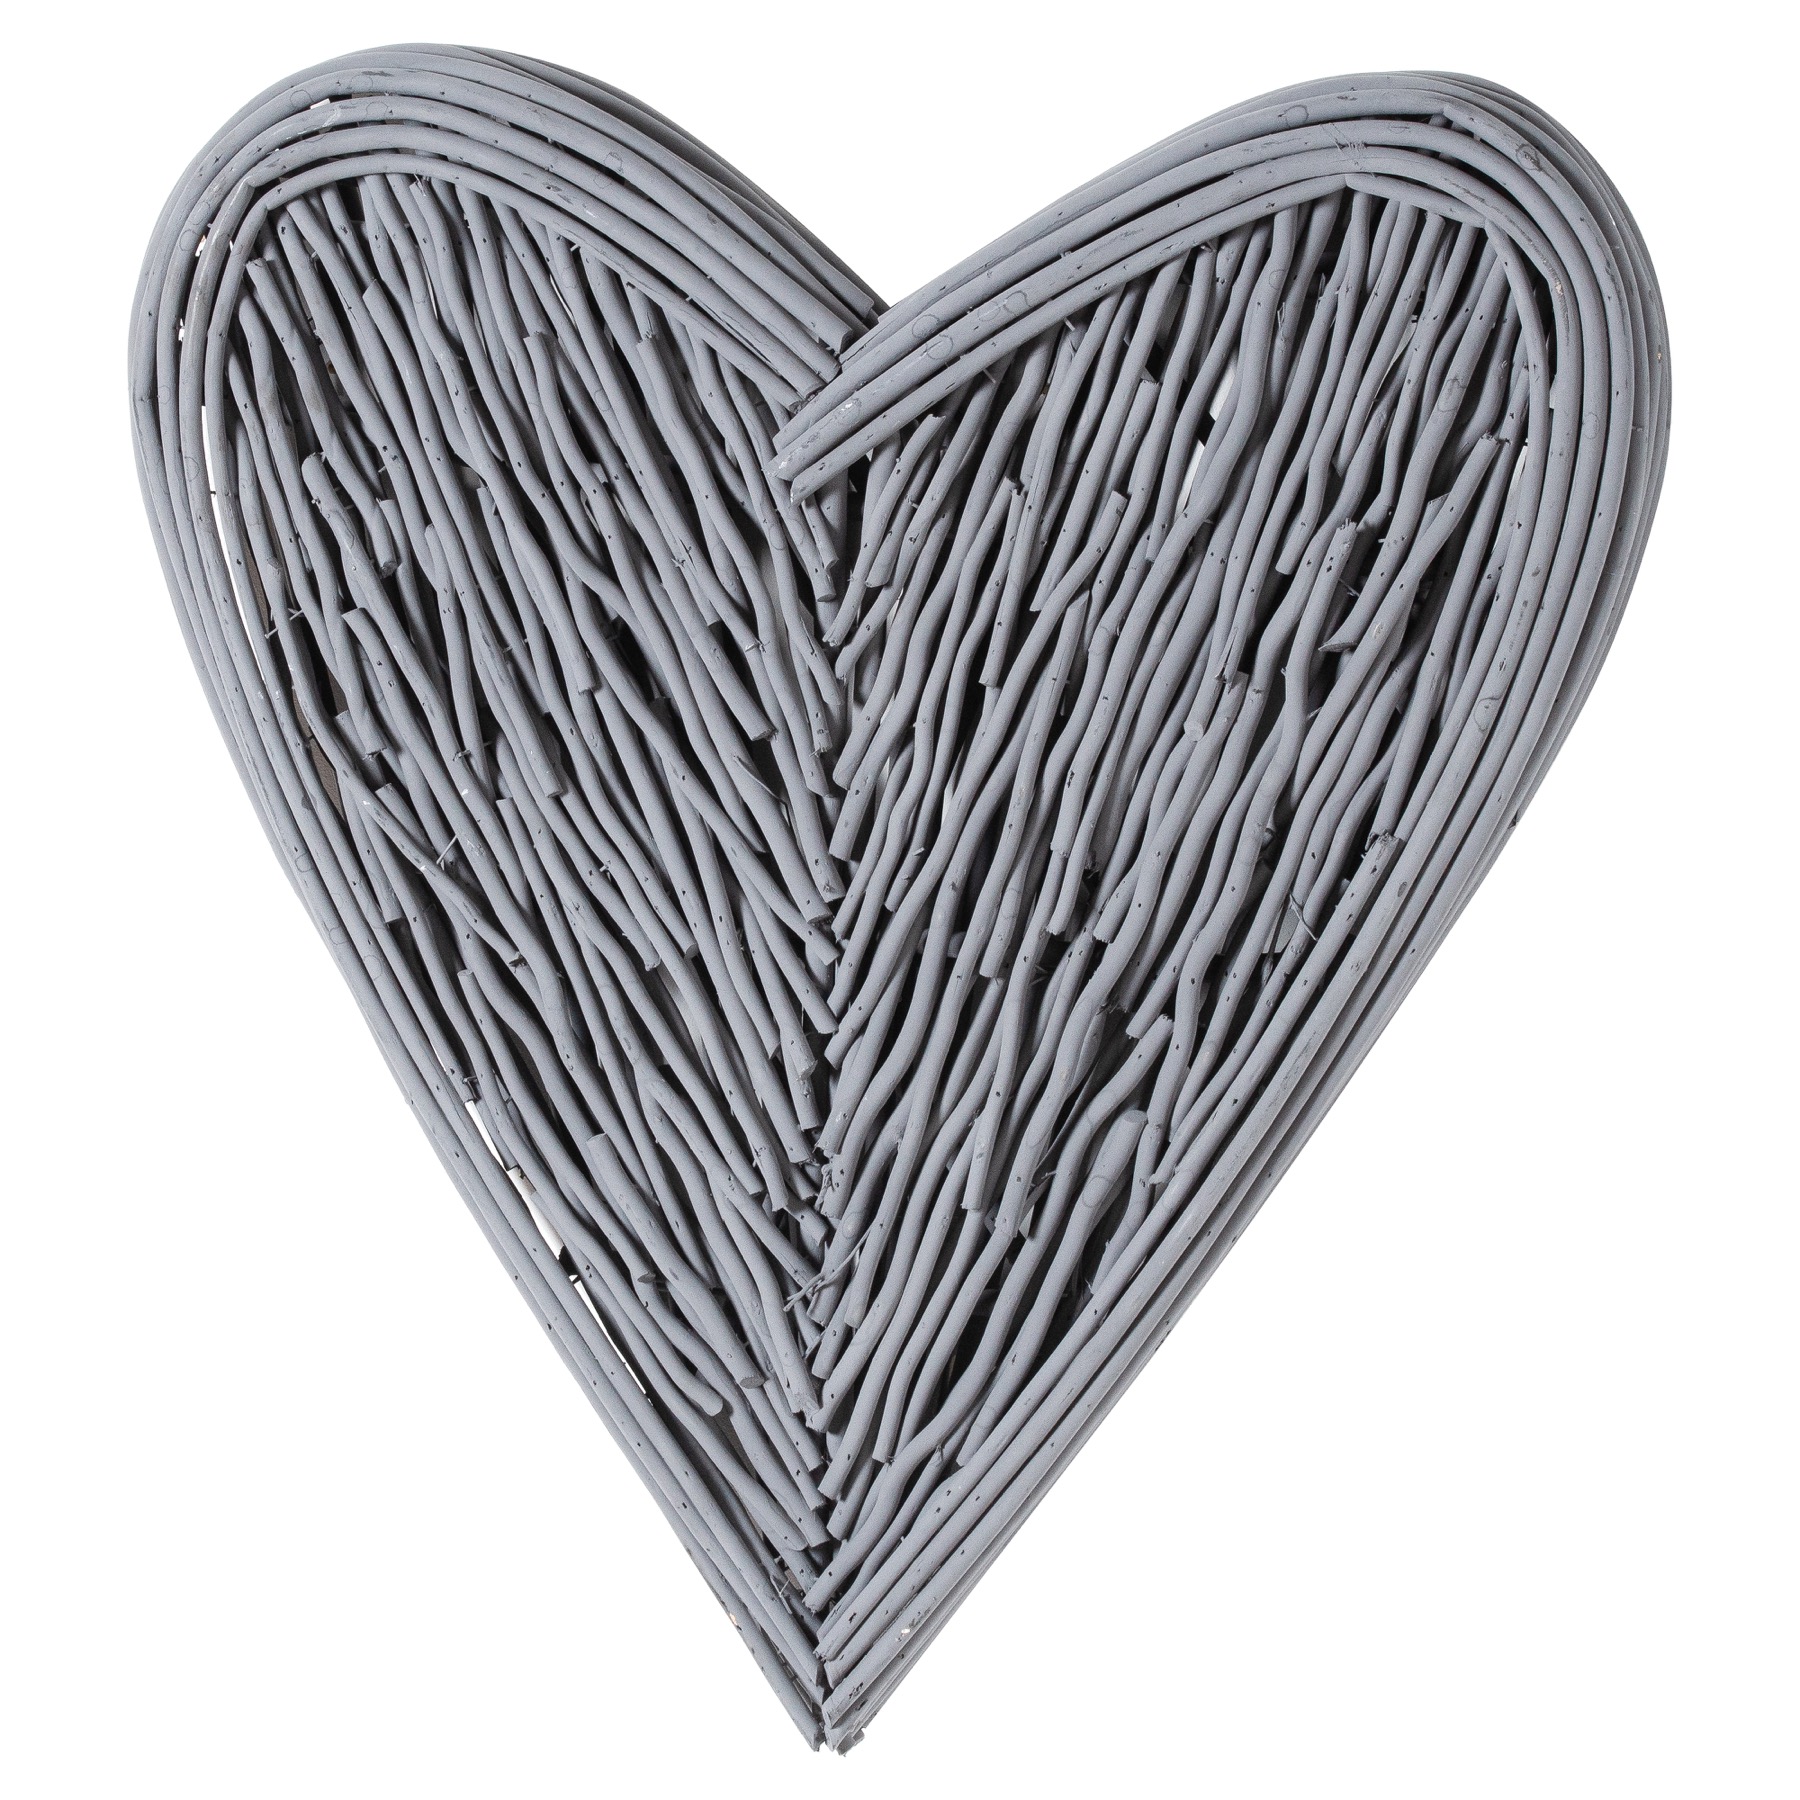 Grey Small Willow Branch Heart - Image 1